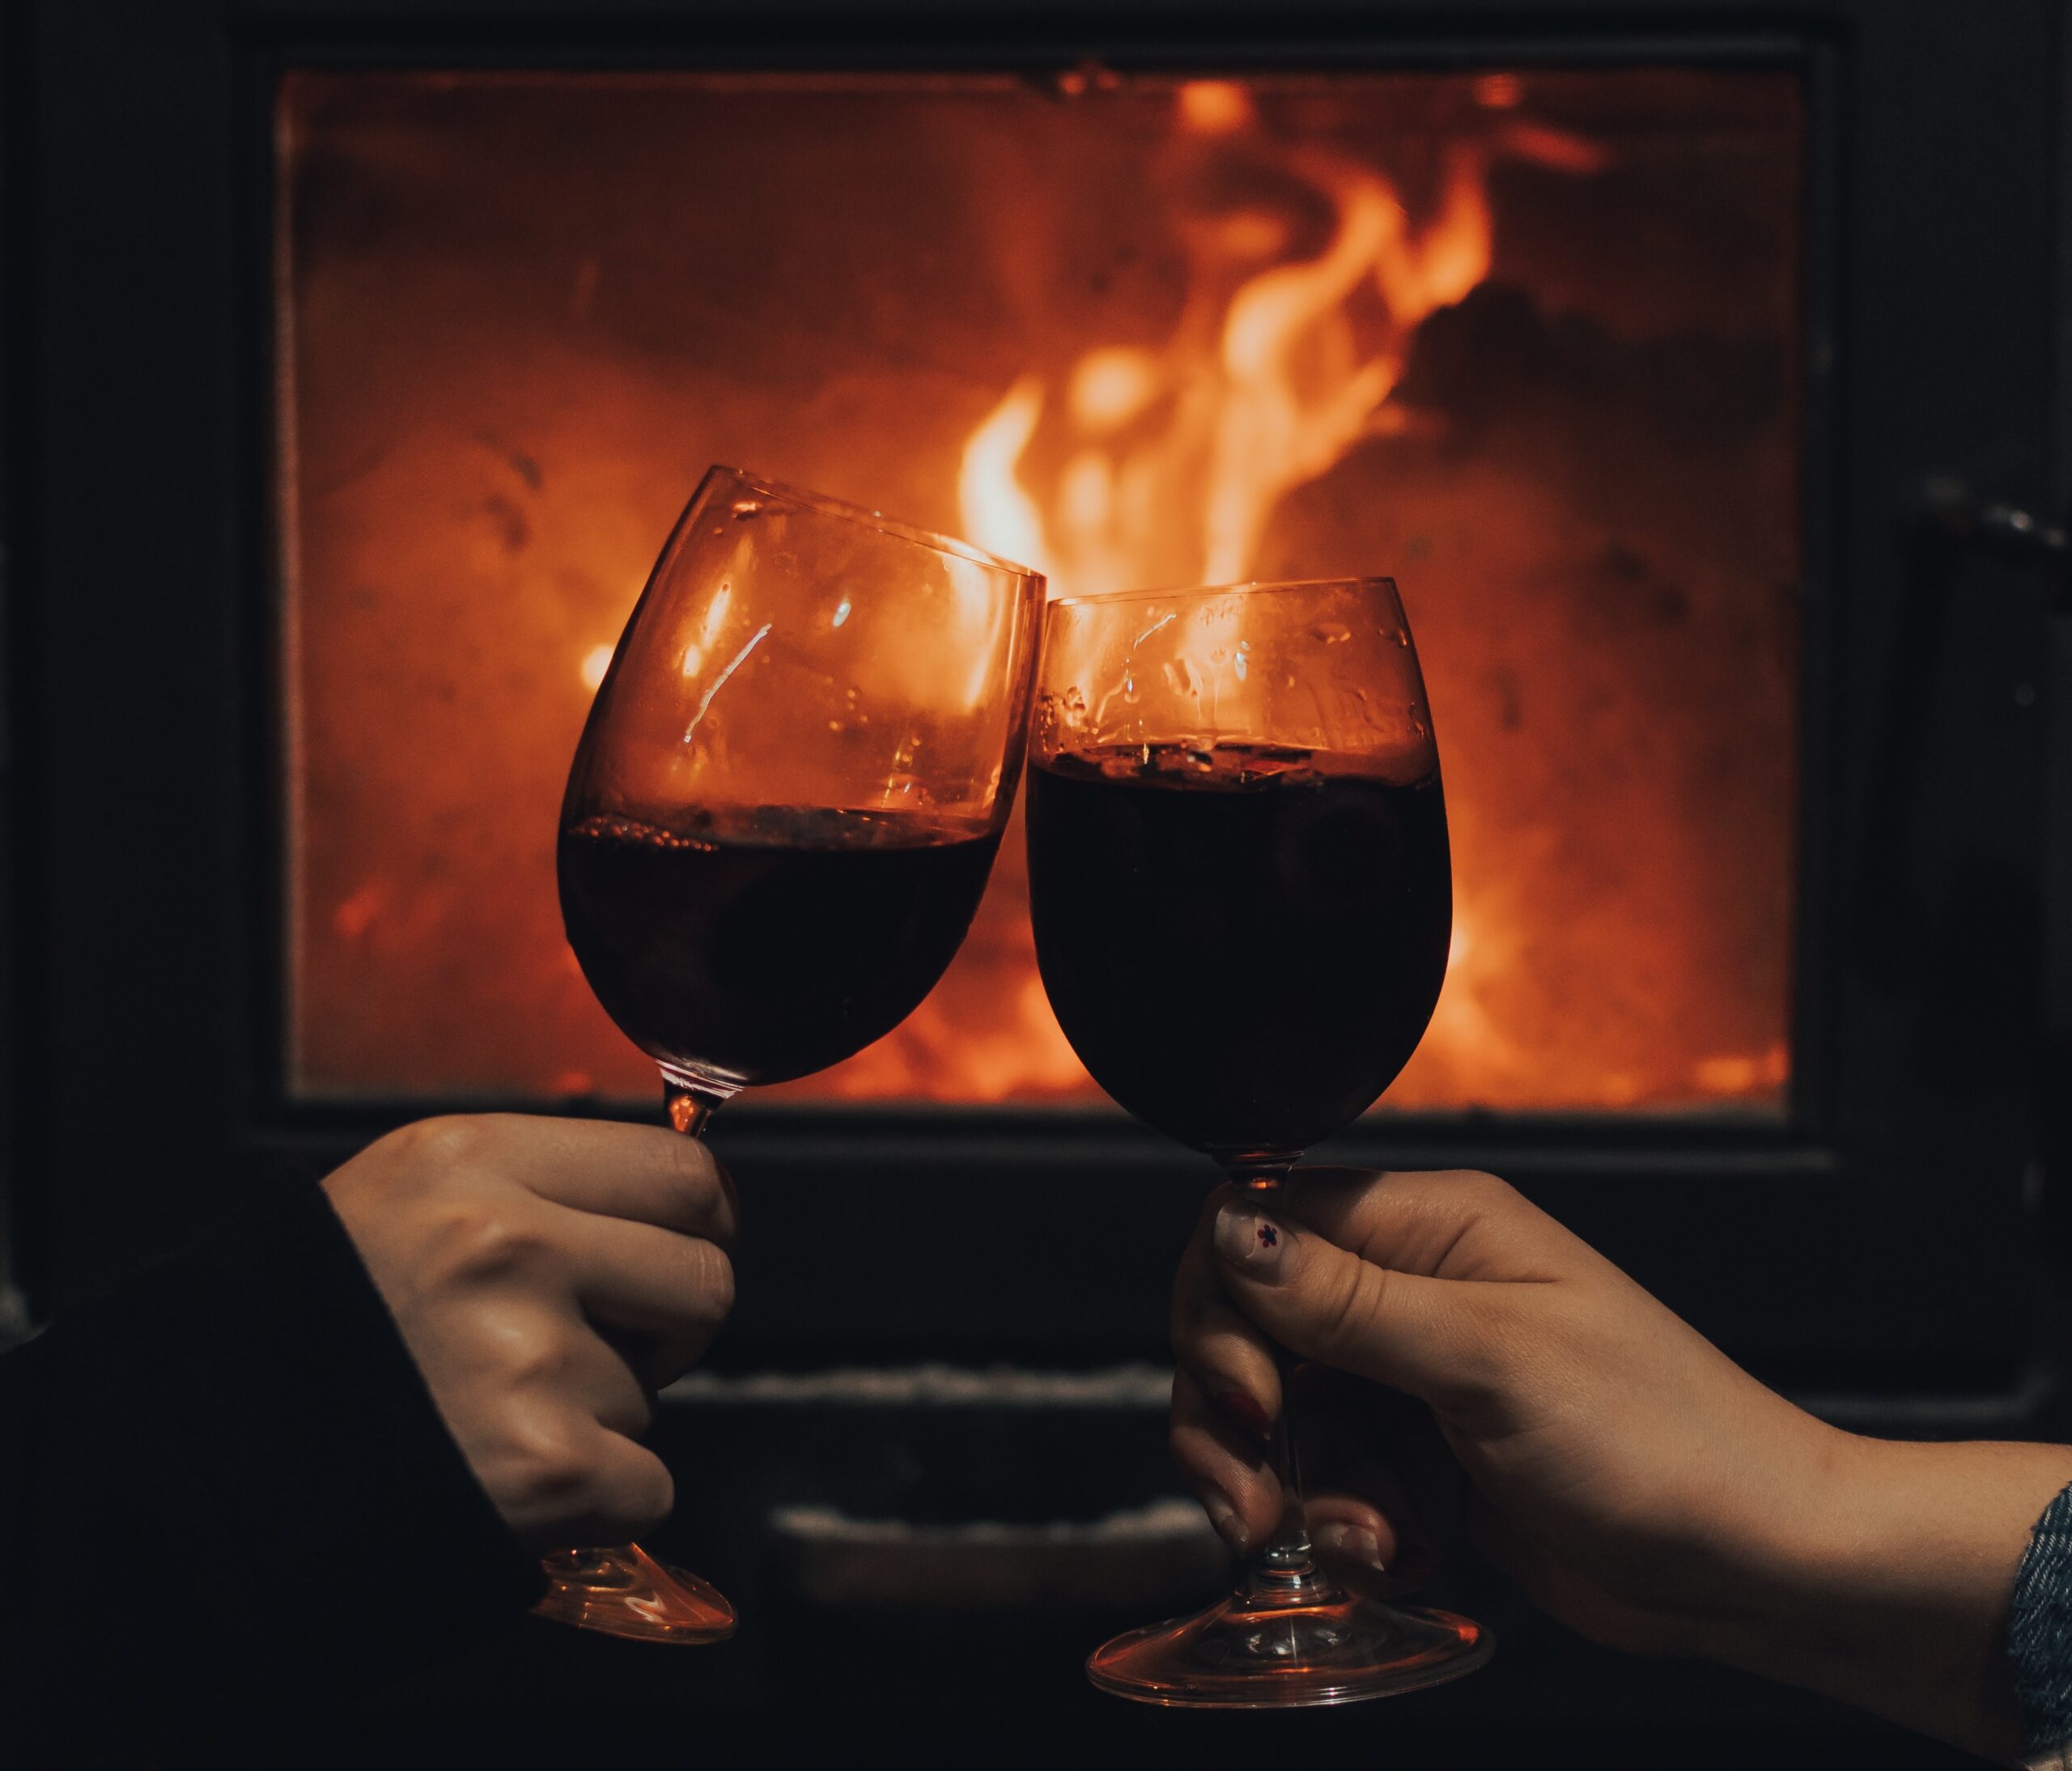 MIntaro hideaway log fires and red wine